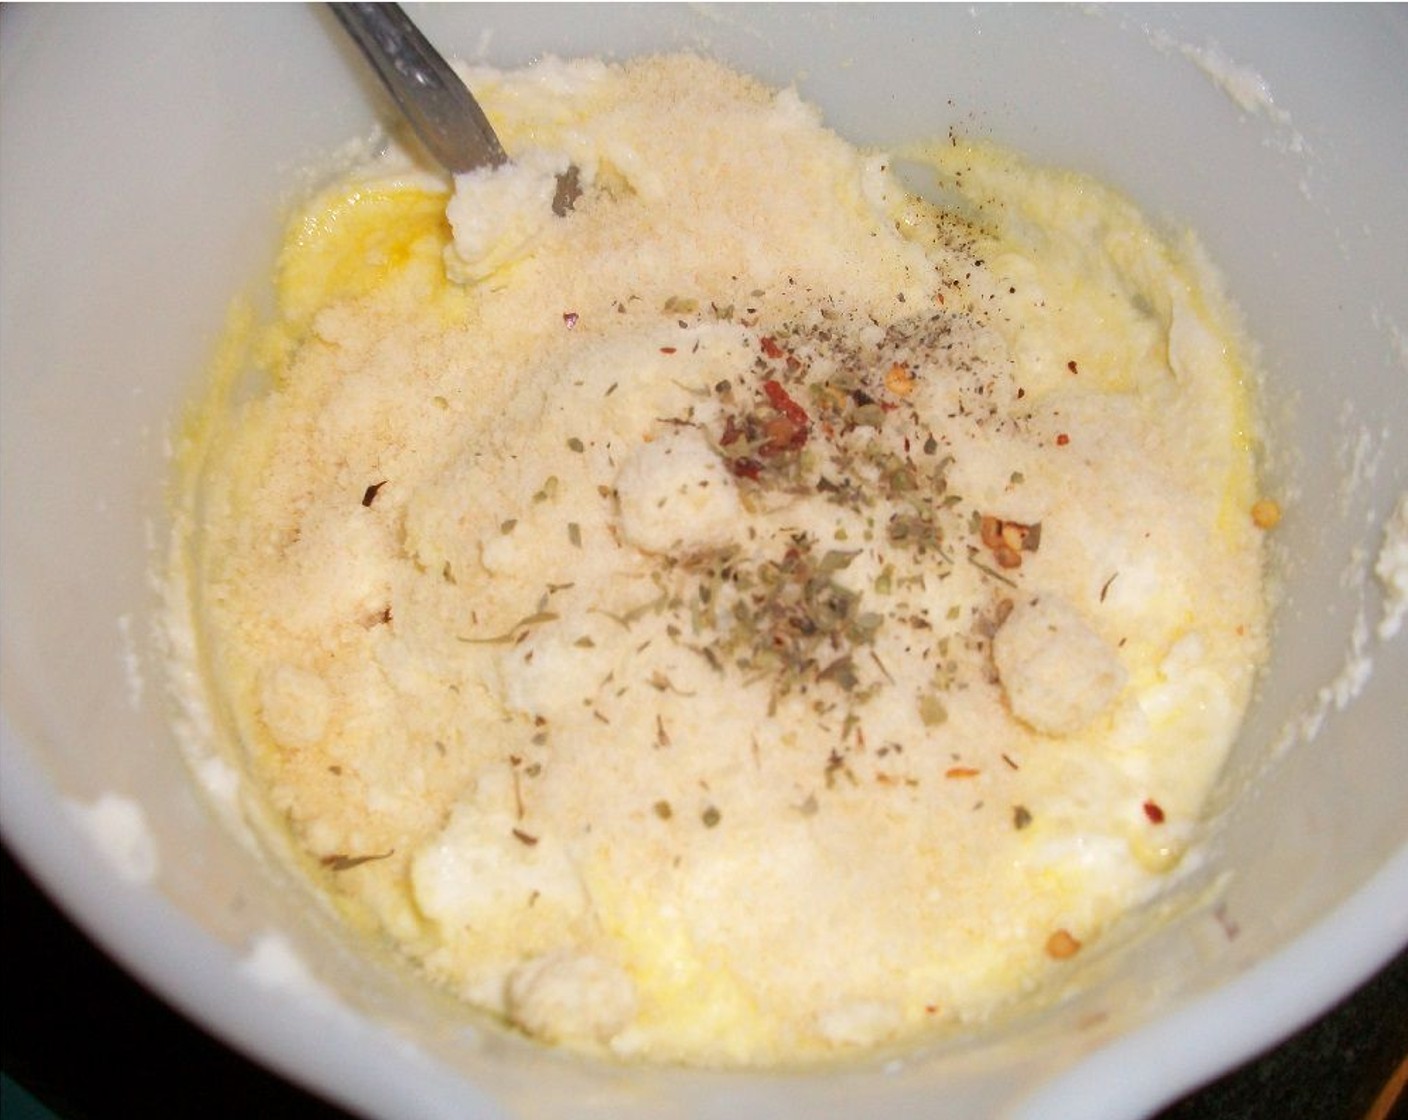 step 4 In a medium bowl, combine Part-Skim Ricotta Cheese (1 3/4 cups), Egg (1), Parmesan Cheese (1/4 cup), Italian Seasoning (1 pinch), Crushed Red Pepper Flakes (1 pinch), and Ground Black Pepper (1 pinch) and whisk until the mixture is fluffy.